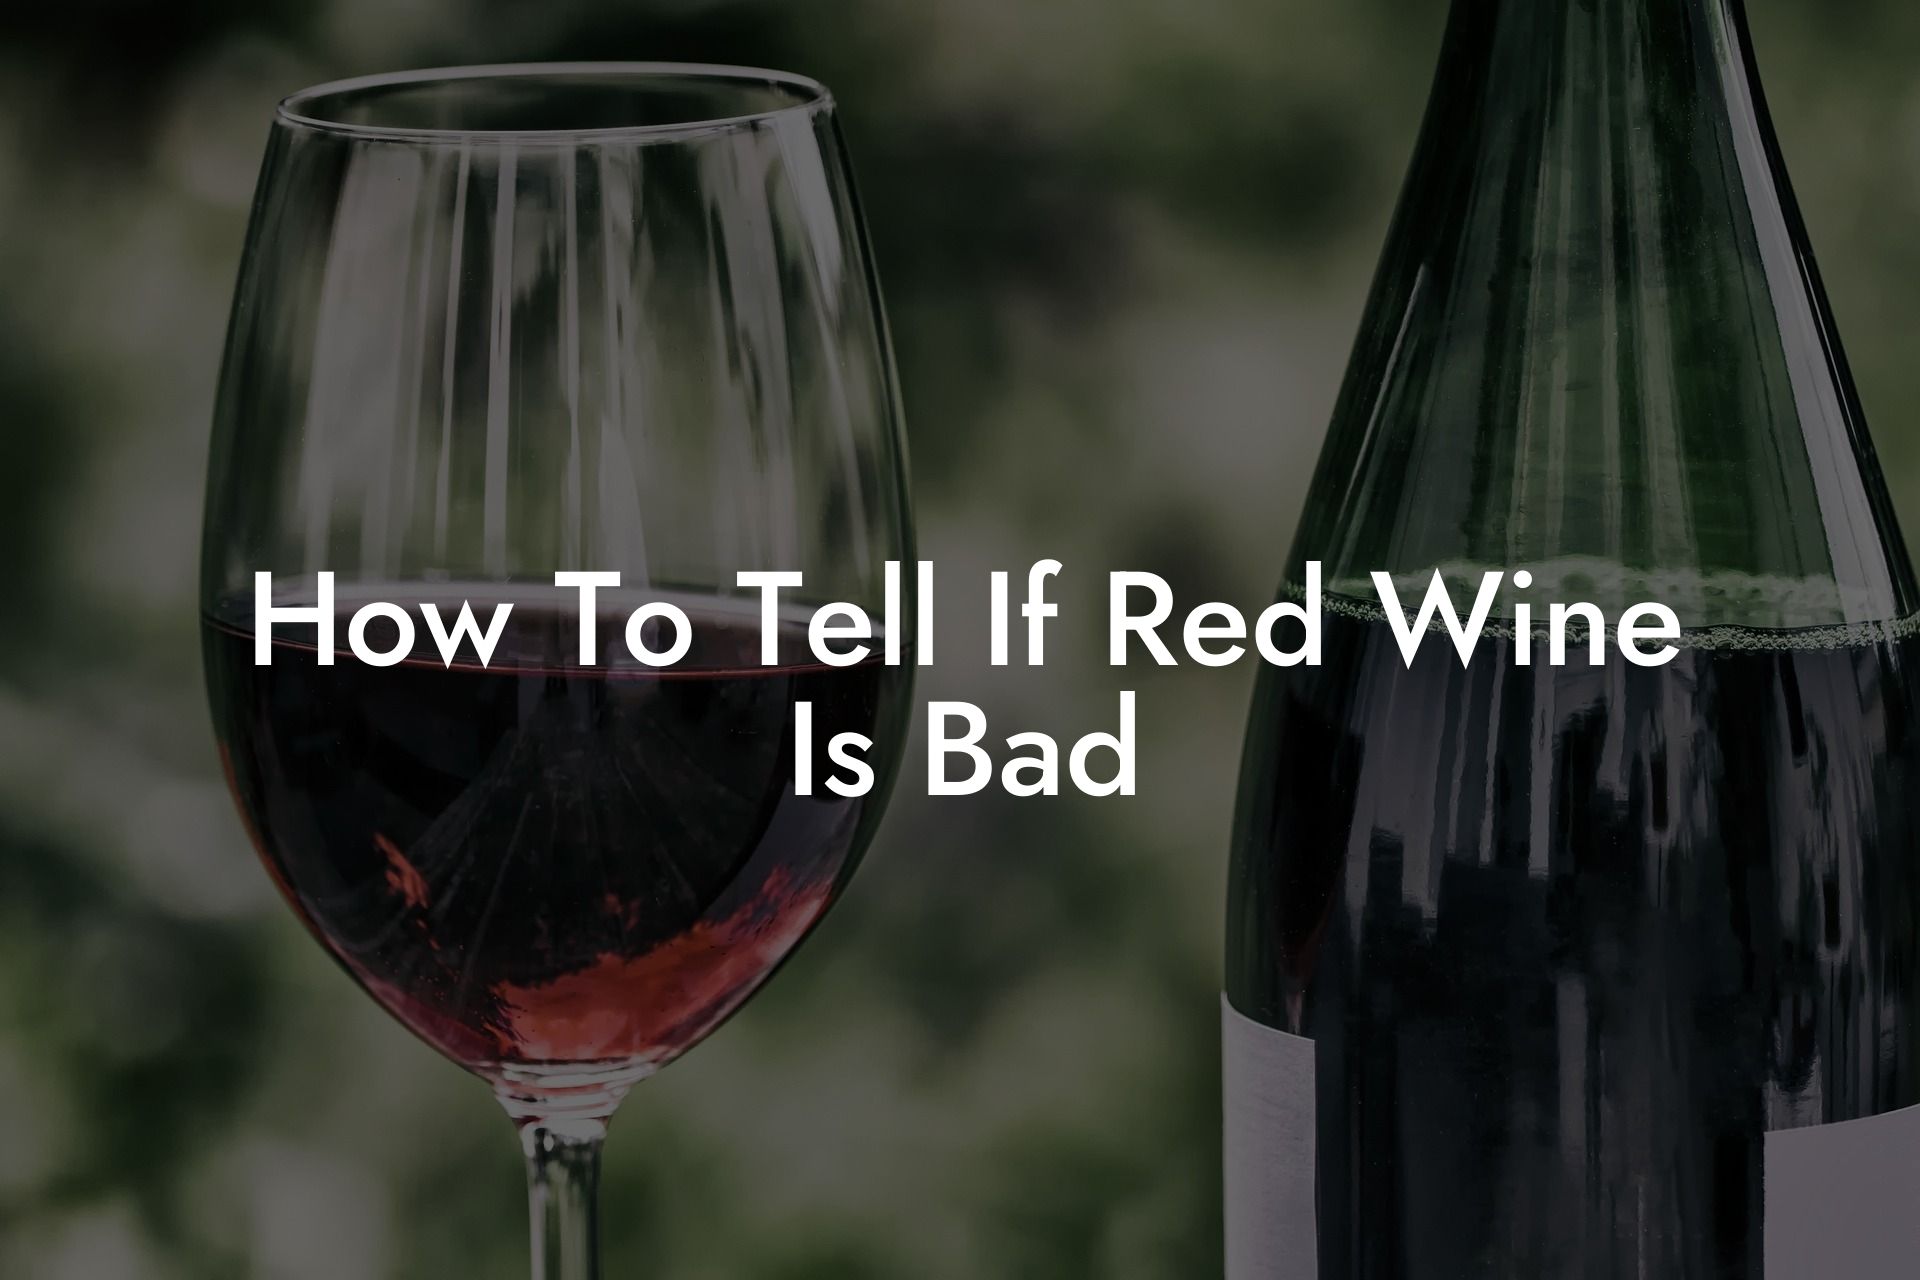 How To Tell If Red Wine Is Bad